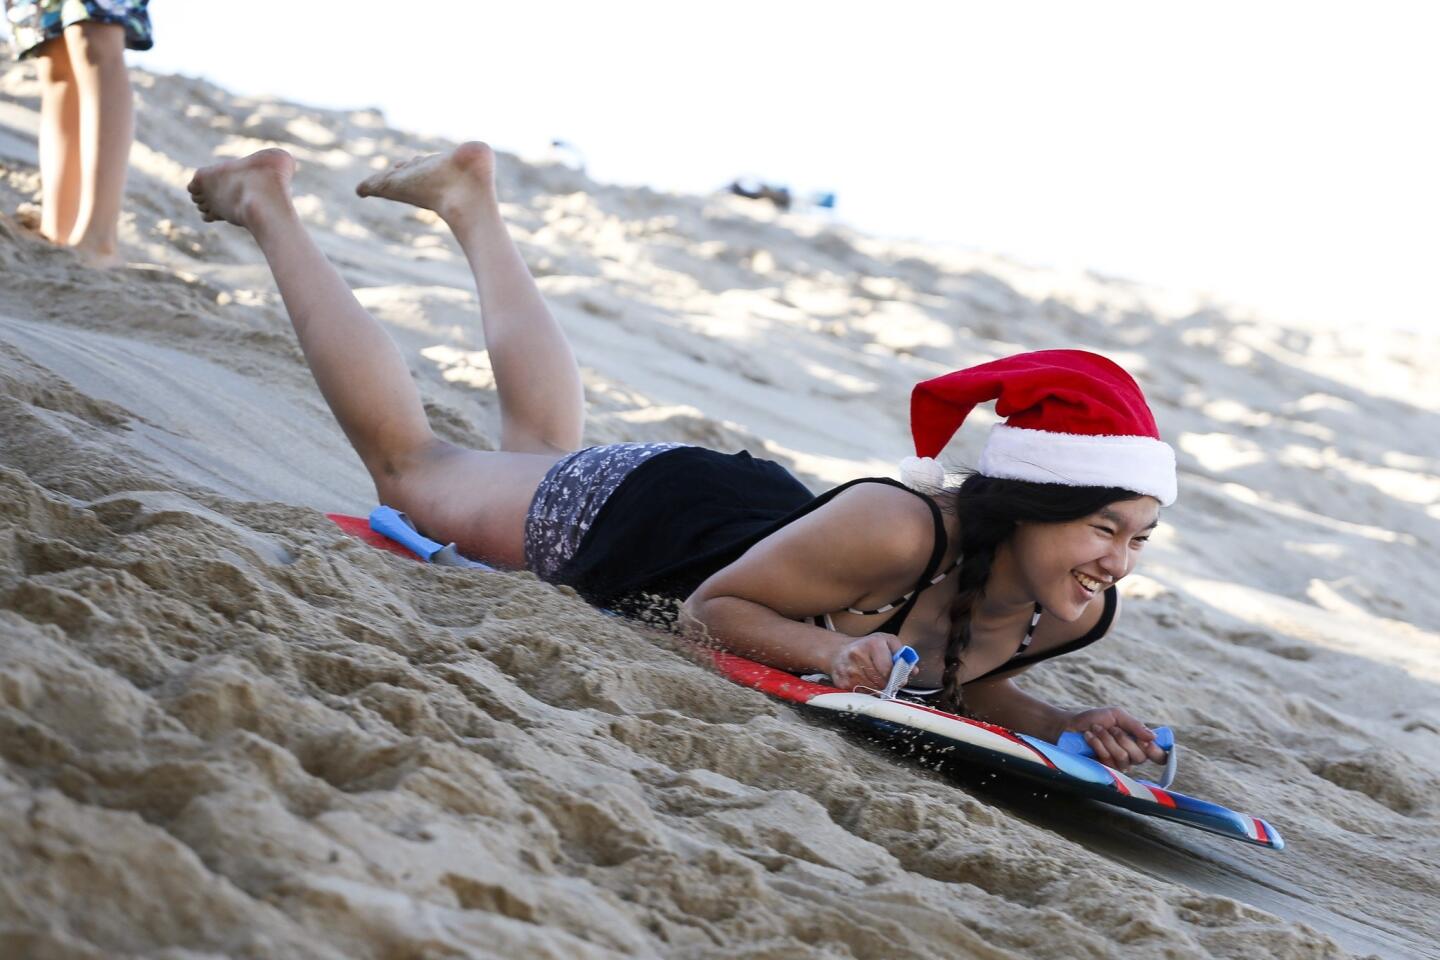 Kiana Kim, 14, of Redondo Beach sleds down a sand dune at the Hermosa Beach pier in the afternoon of Christmas Day.